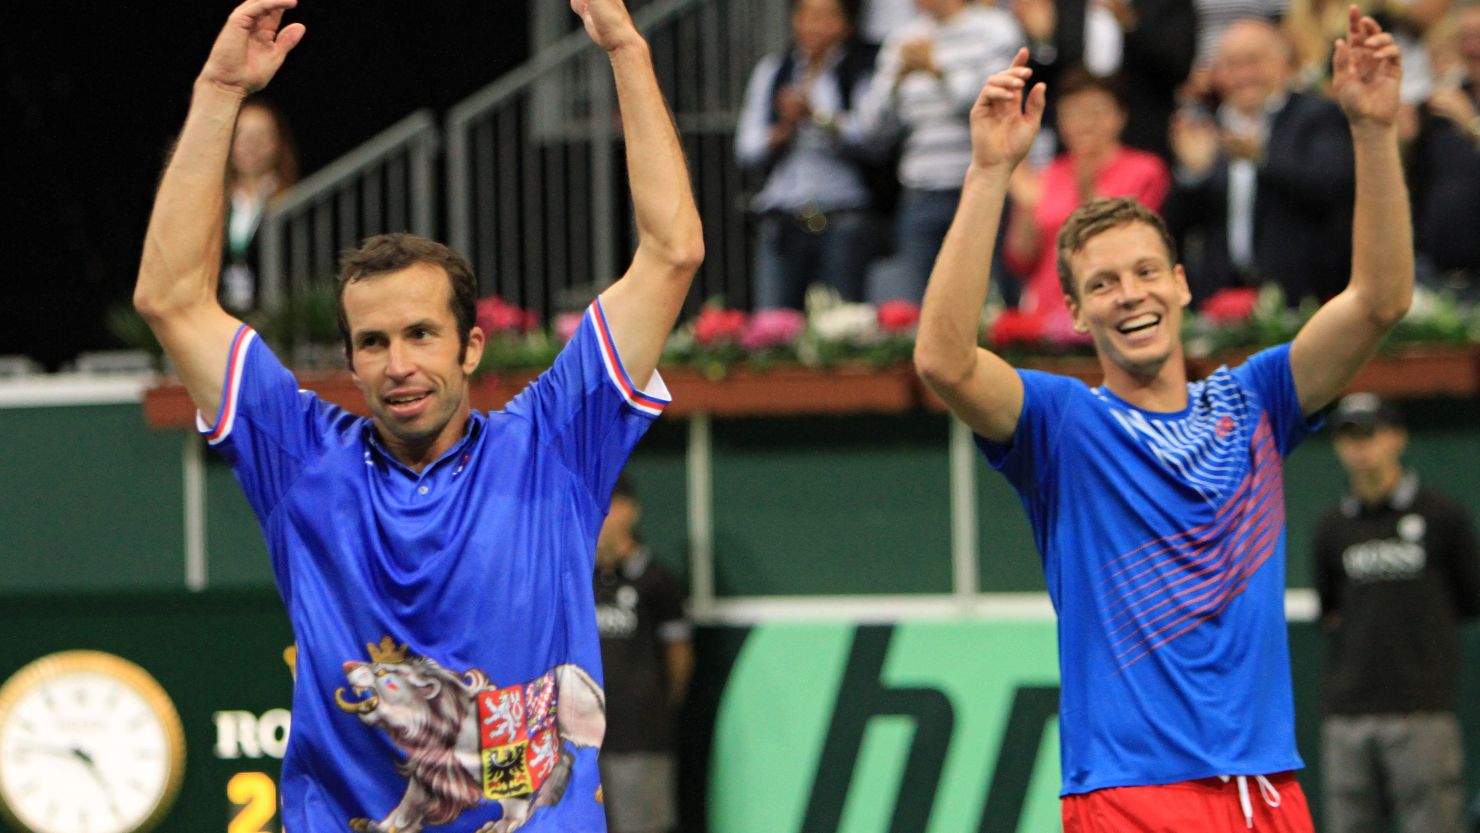 Tomas Berdych (R) and Radek Stepanek (L) celebrate after securing a 3-0 win for the Czech Republic over Argentina in Prague.